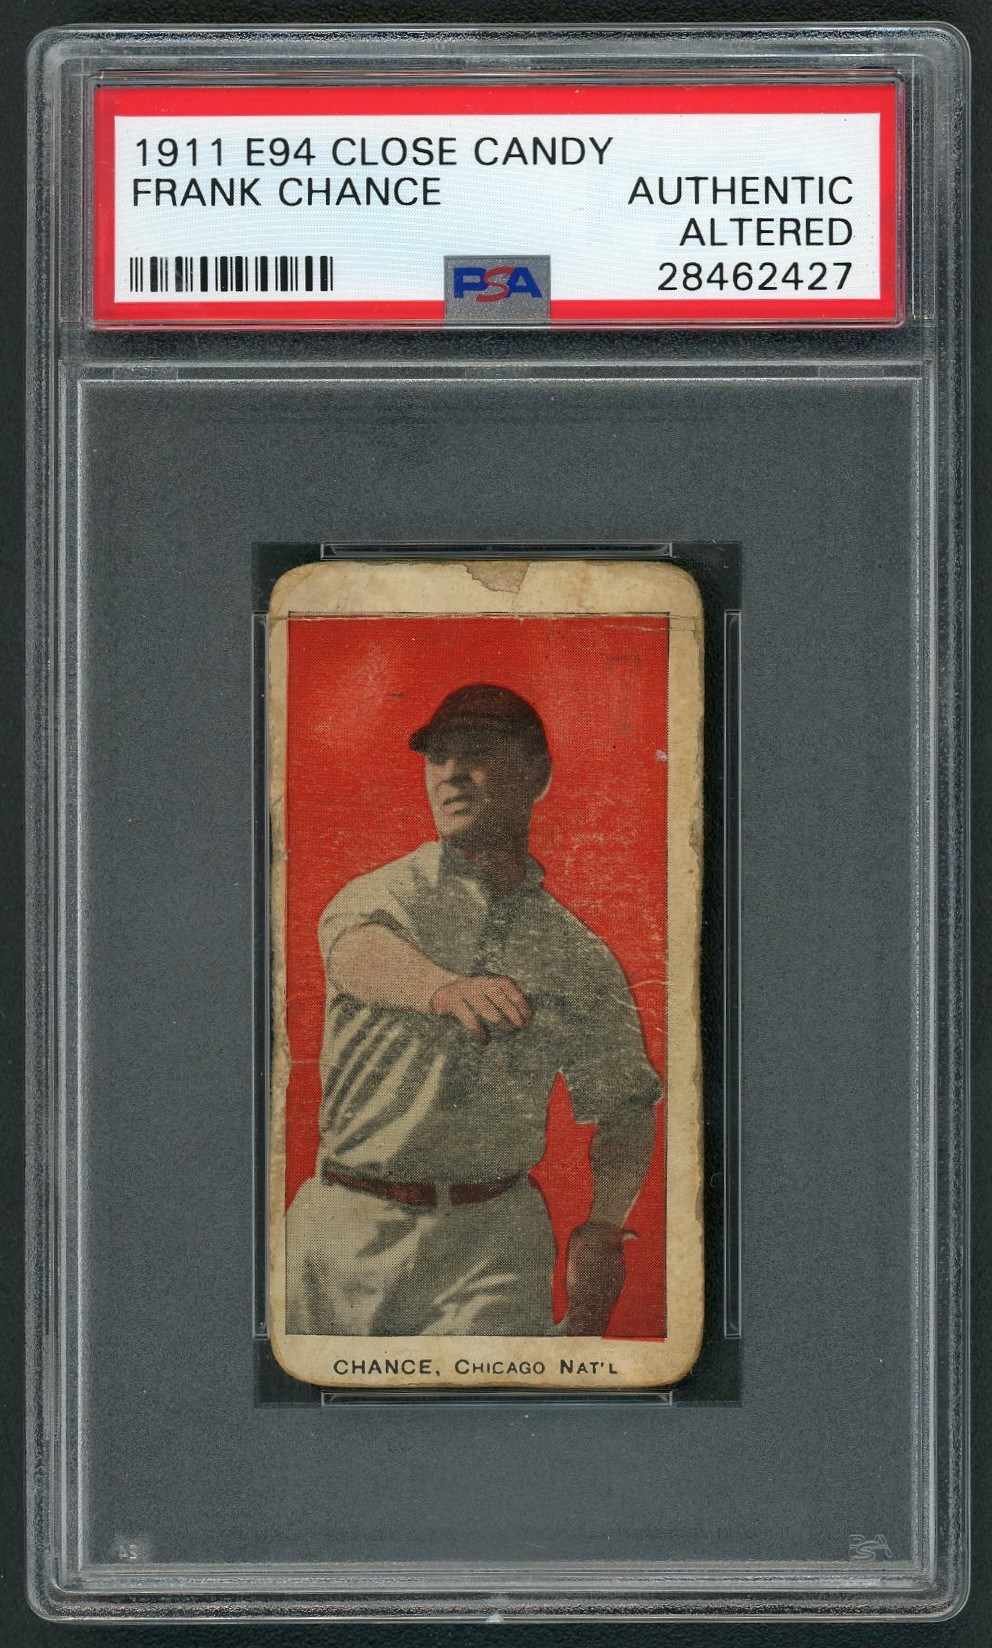 1911 E94 Close Candy Frank Chance - PSA AUTHENTIC Altered